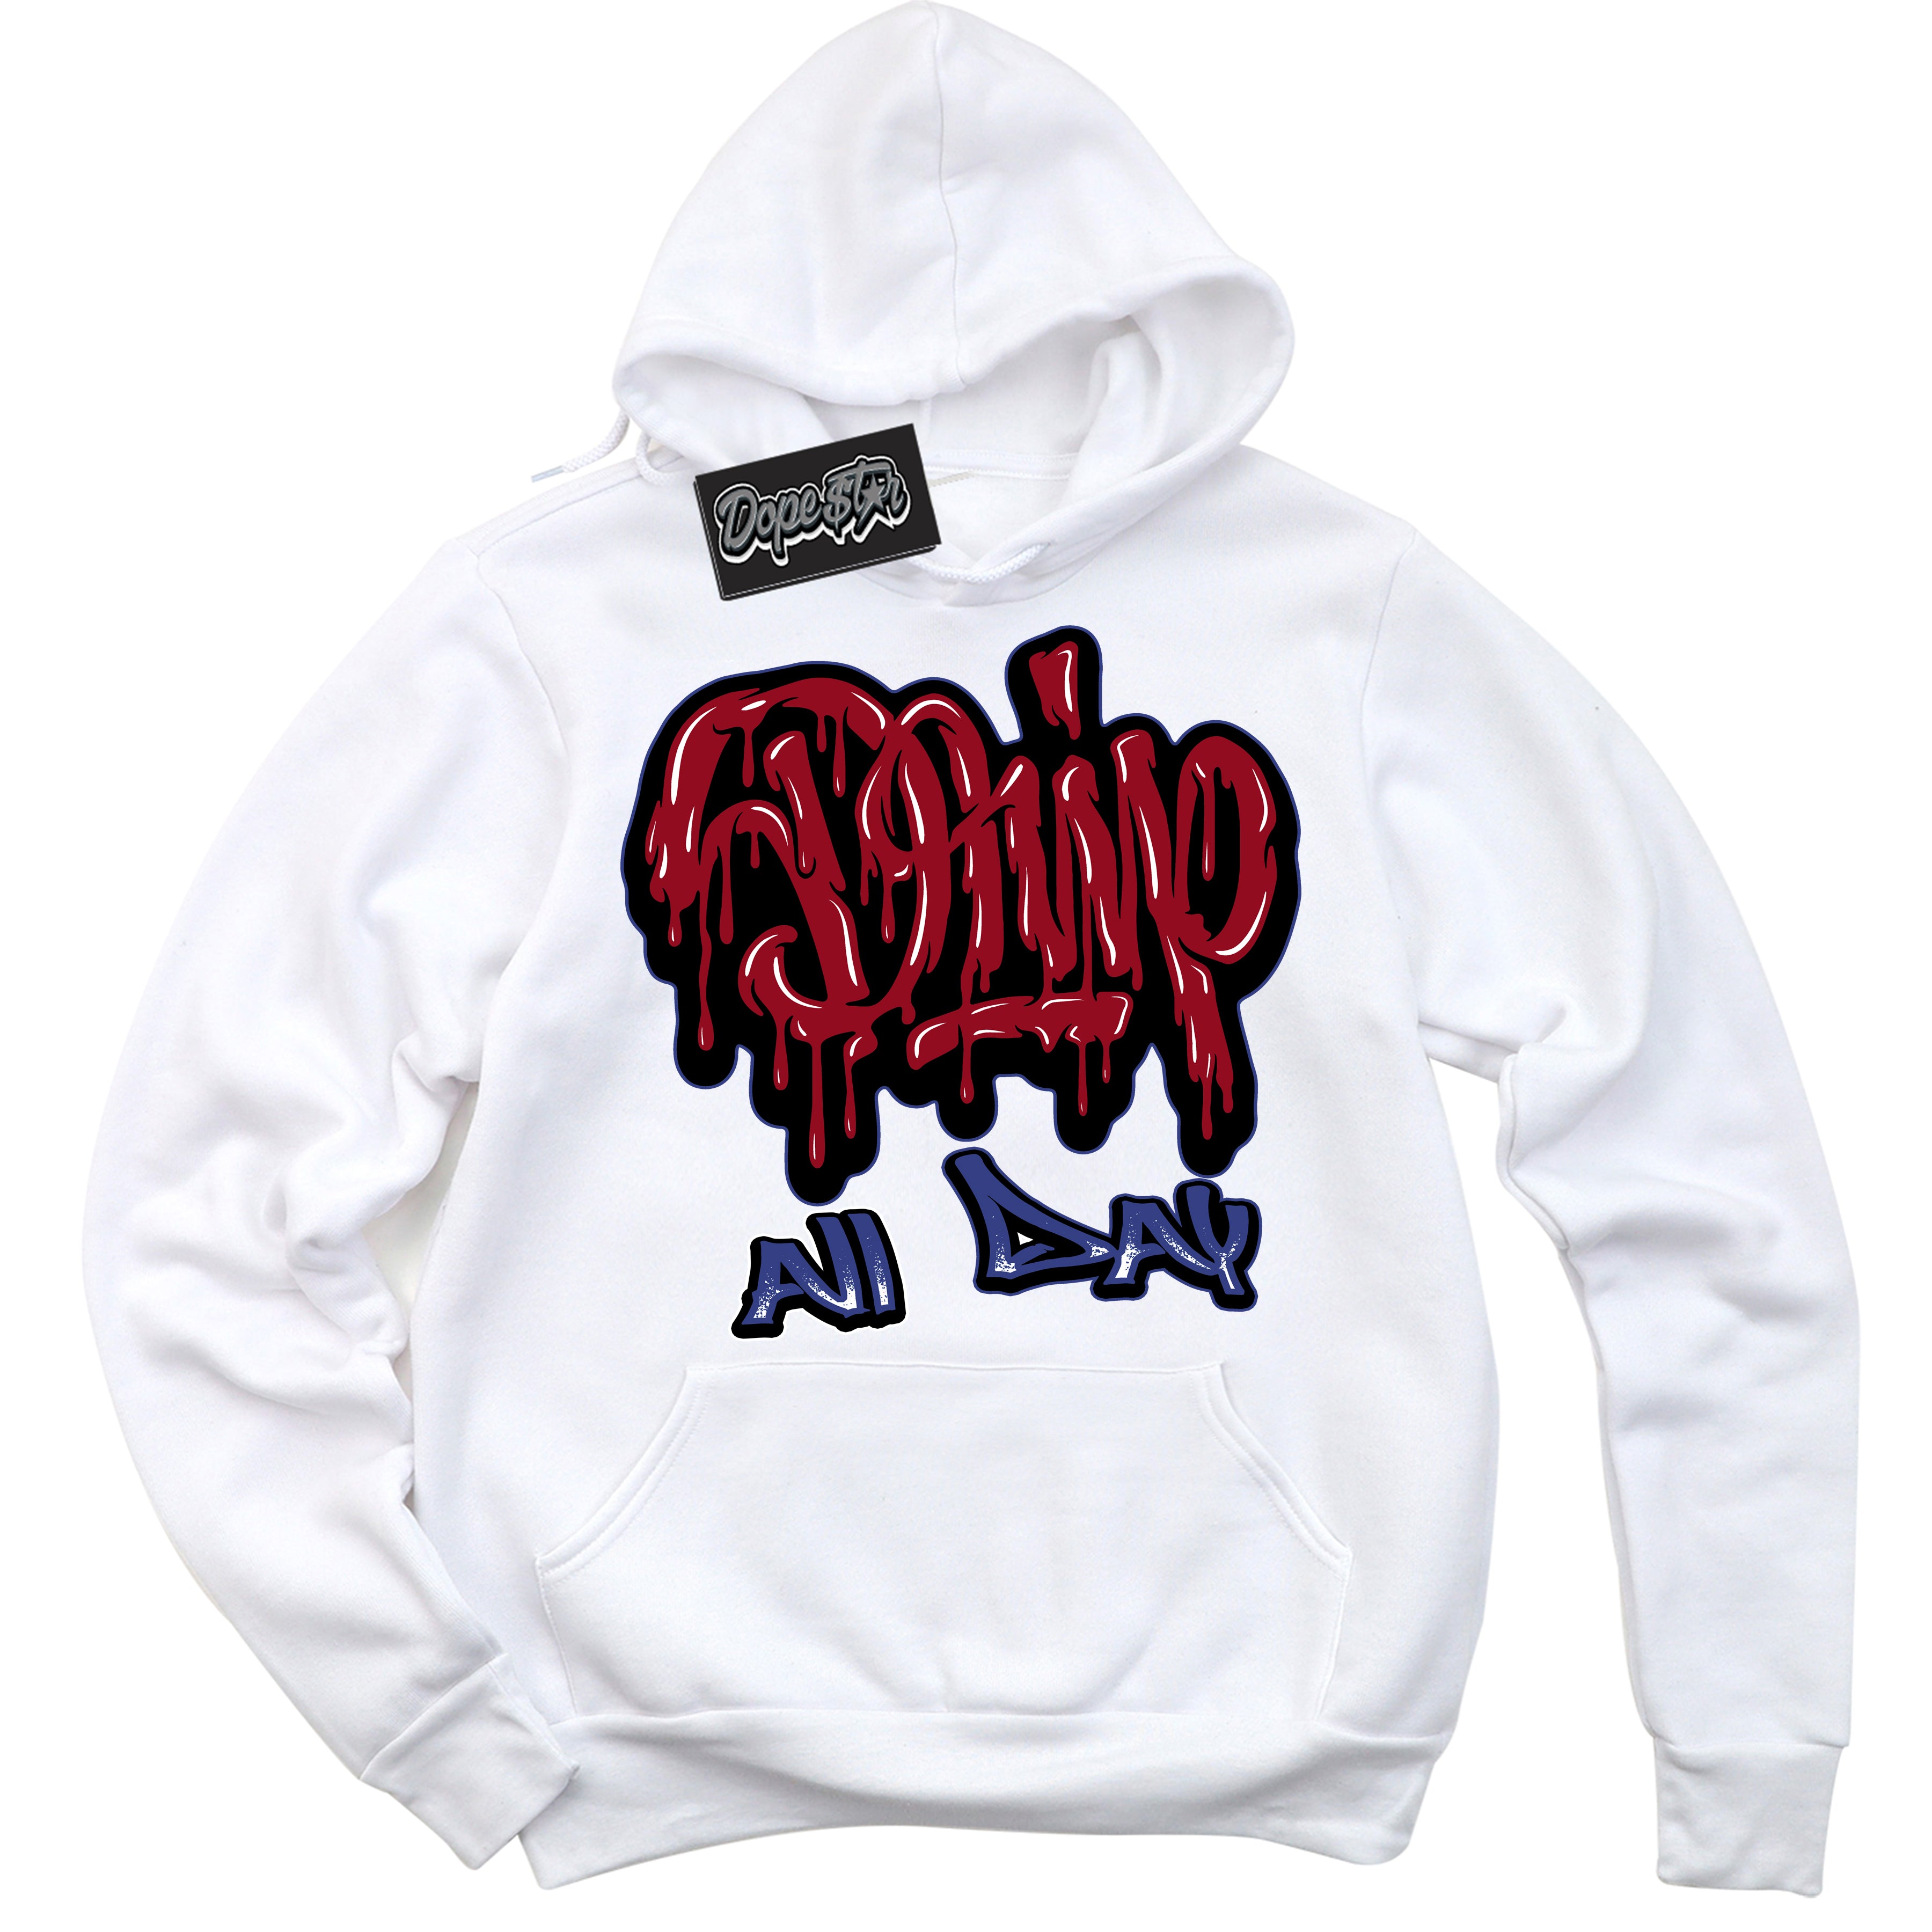 Cool White Hoodie with “ Drip All Day ”  design that Perfectly Matches Playoffs 8s Sneakers.